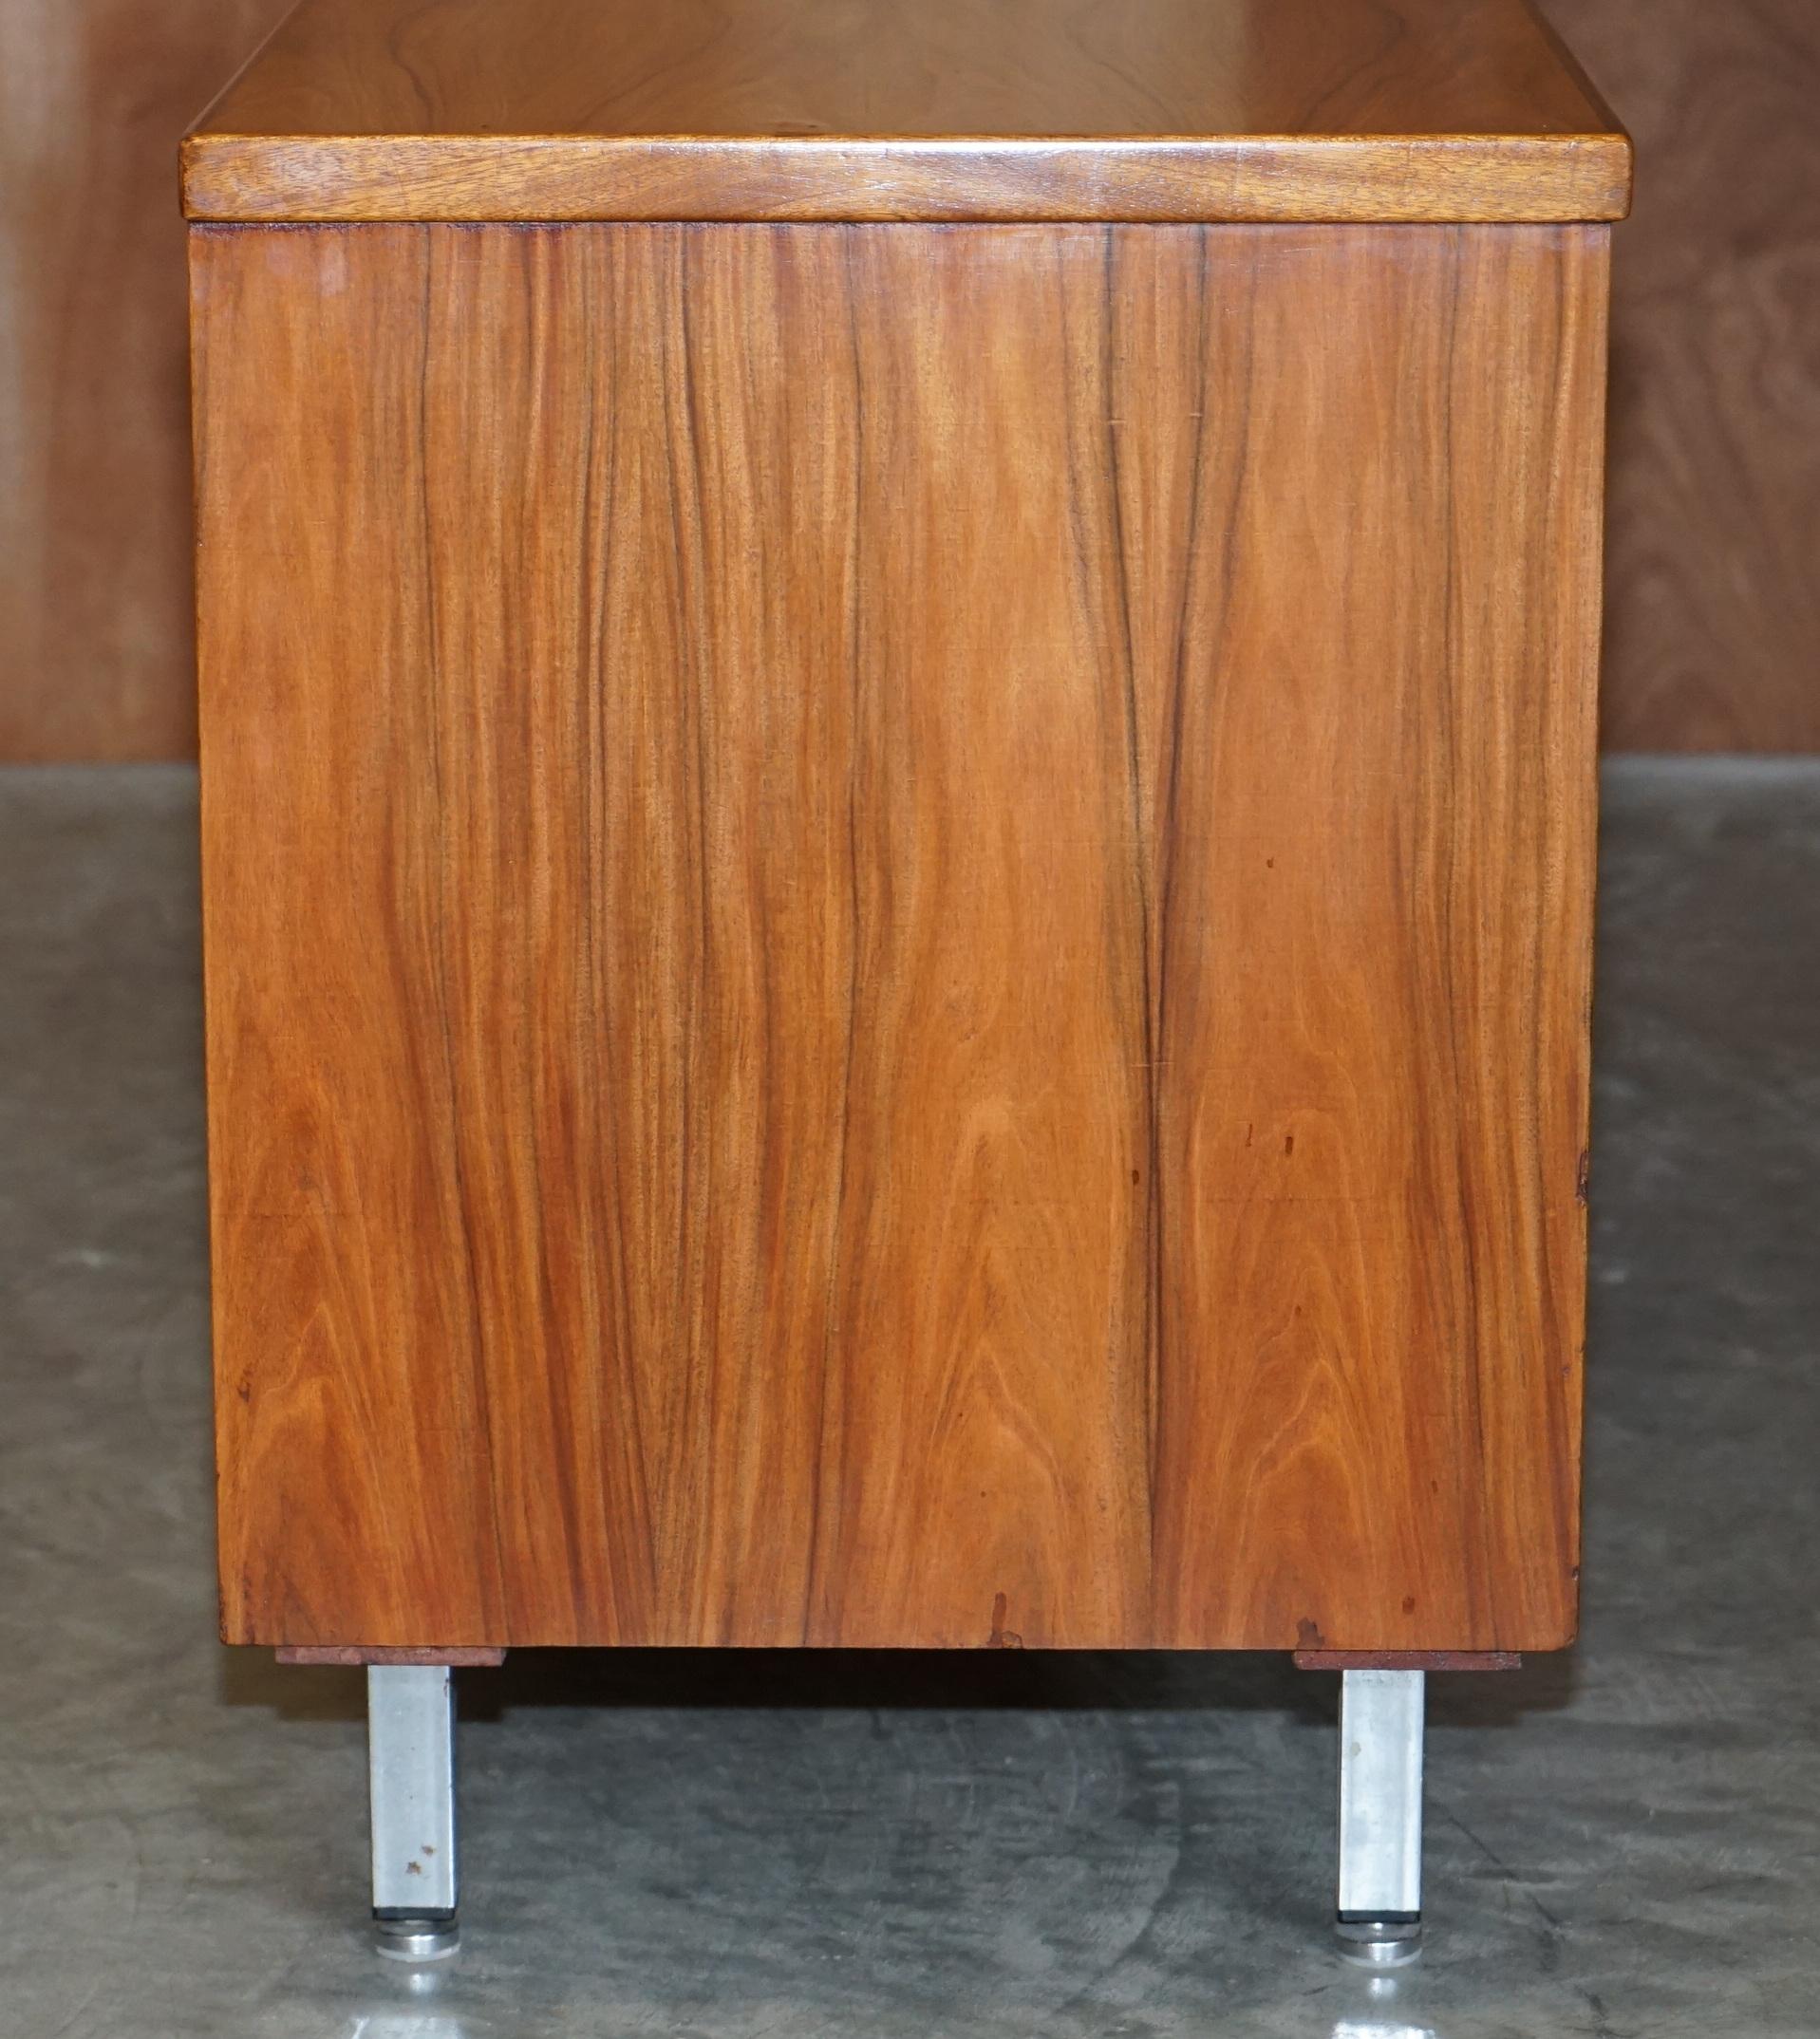 Stunning Restored Mid Century Modern Period Hardwood Sideboard with Chrome Legs For Sale 4